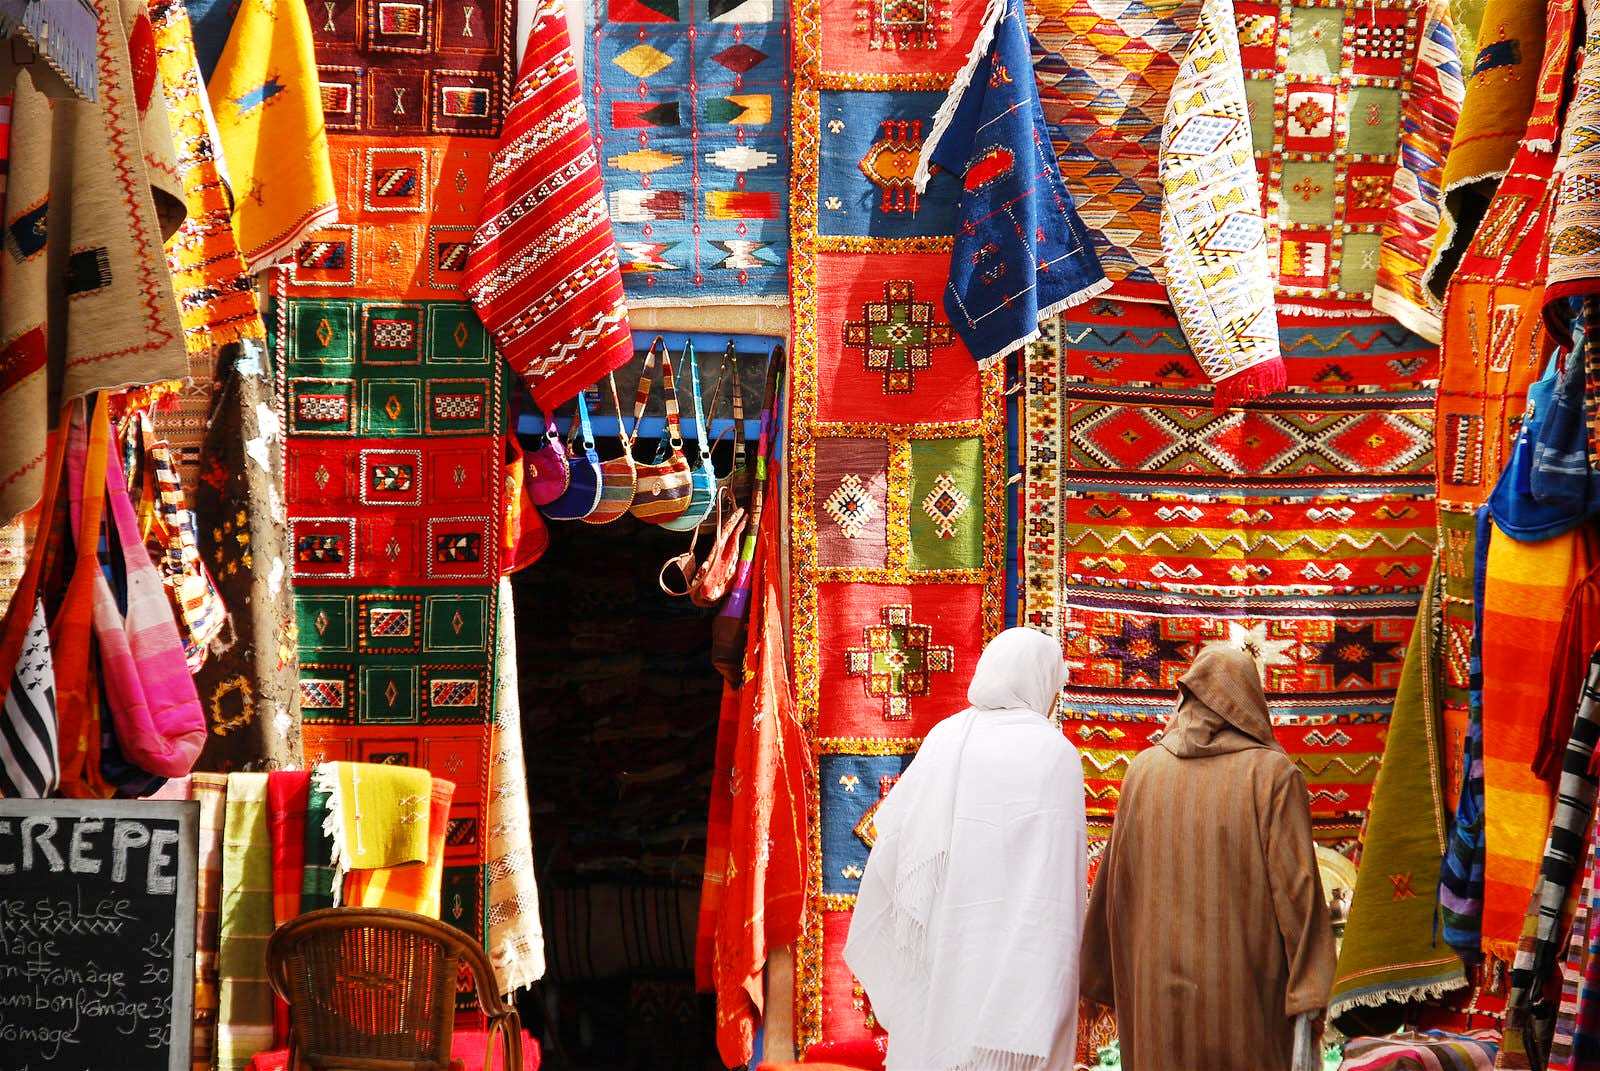 Morocco shopping guided tour in Marrakech to explore Souks and buy handicrafts from local artisans